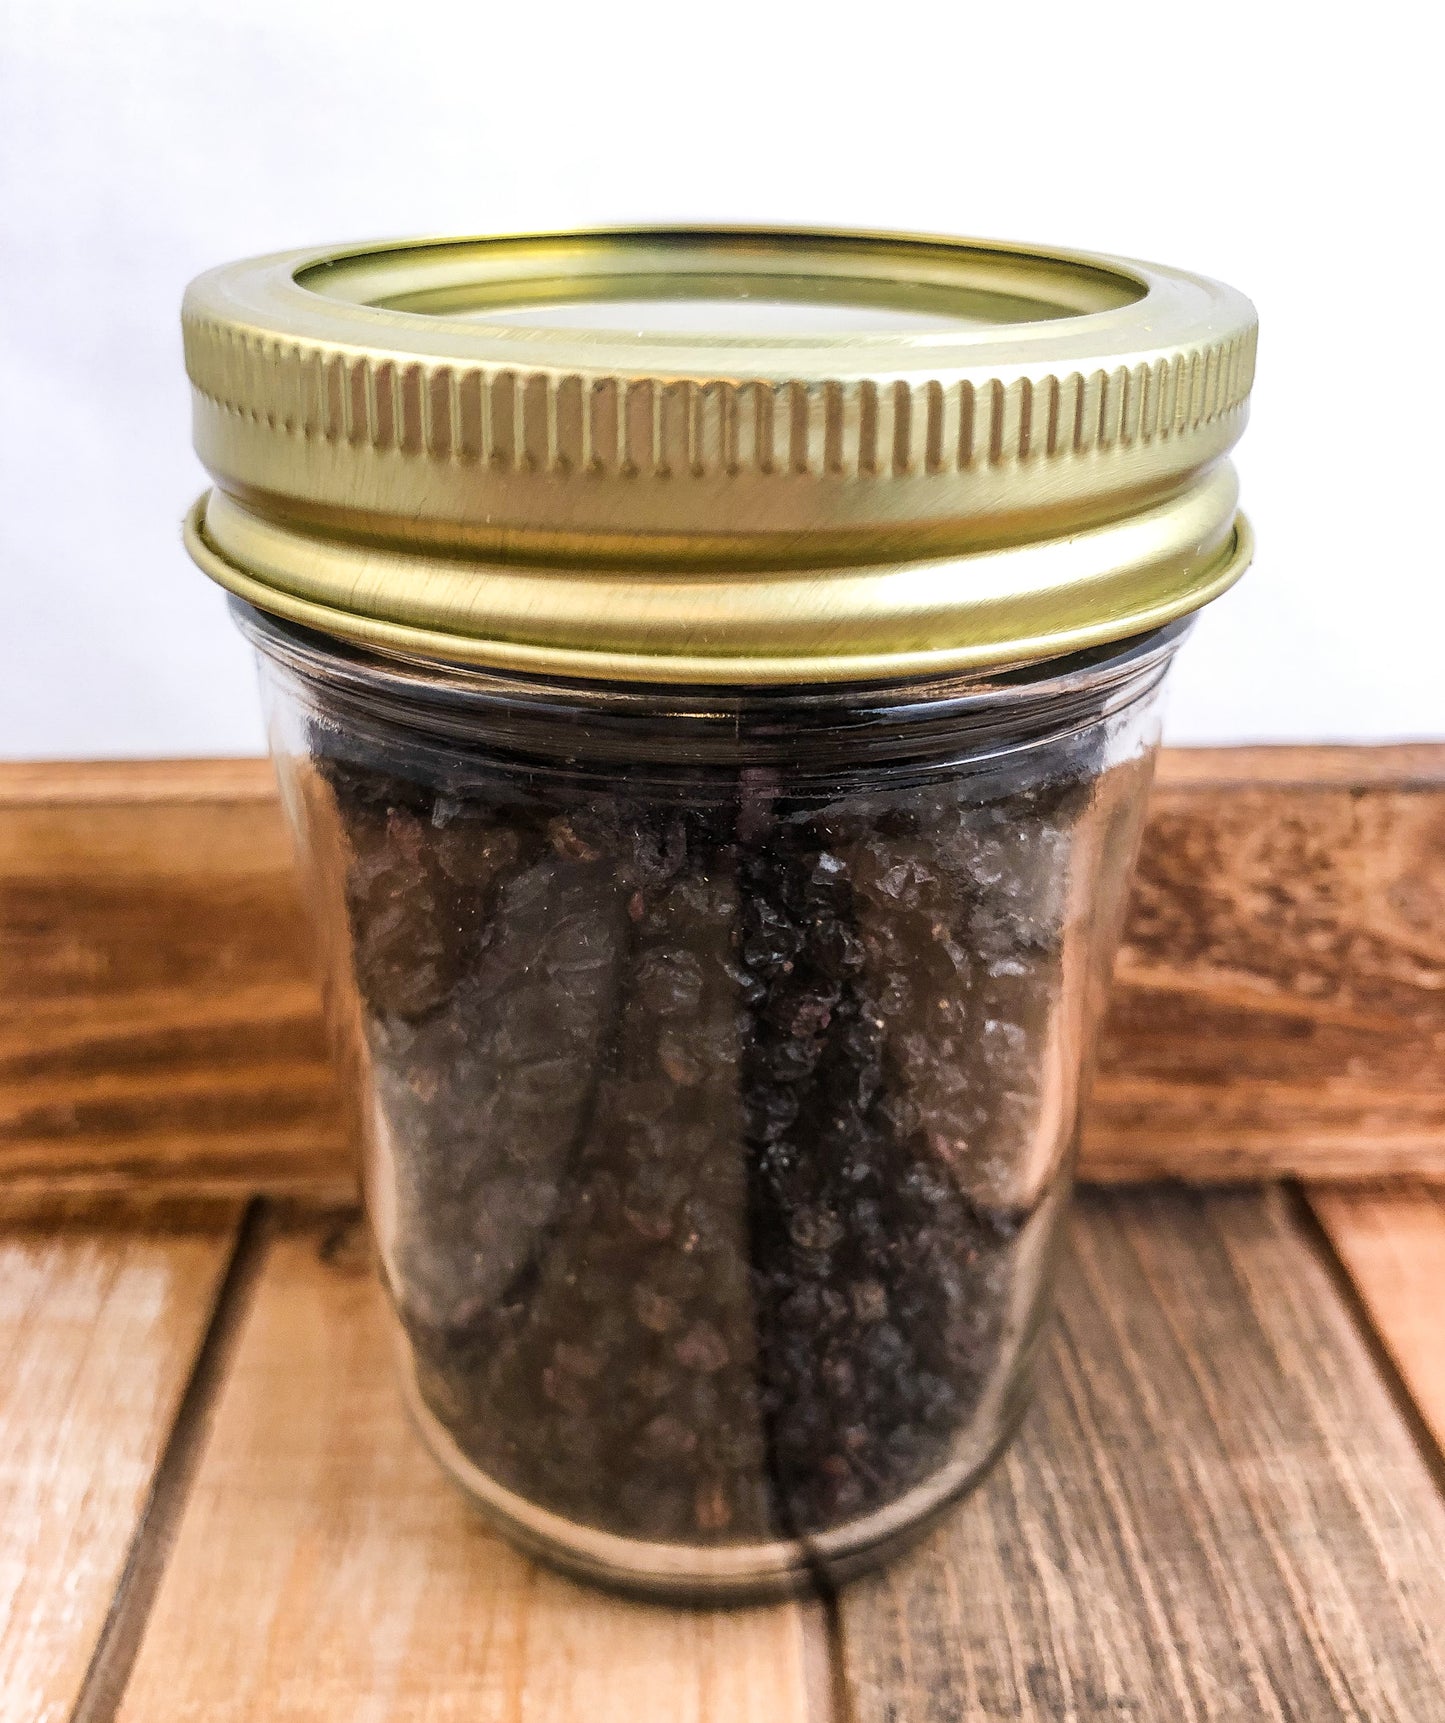 dried elderberry in small jar with wooden background